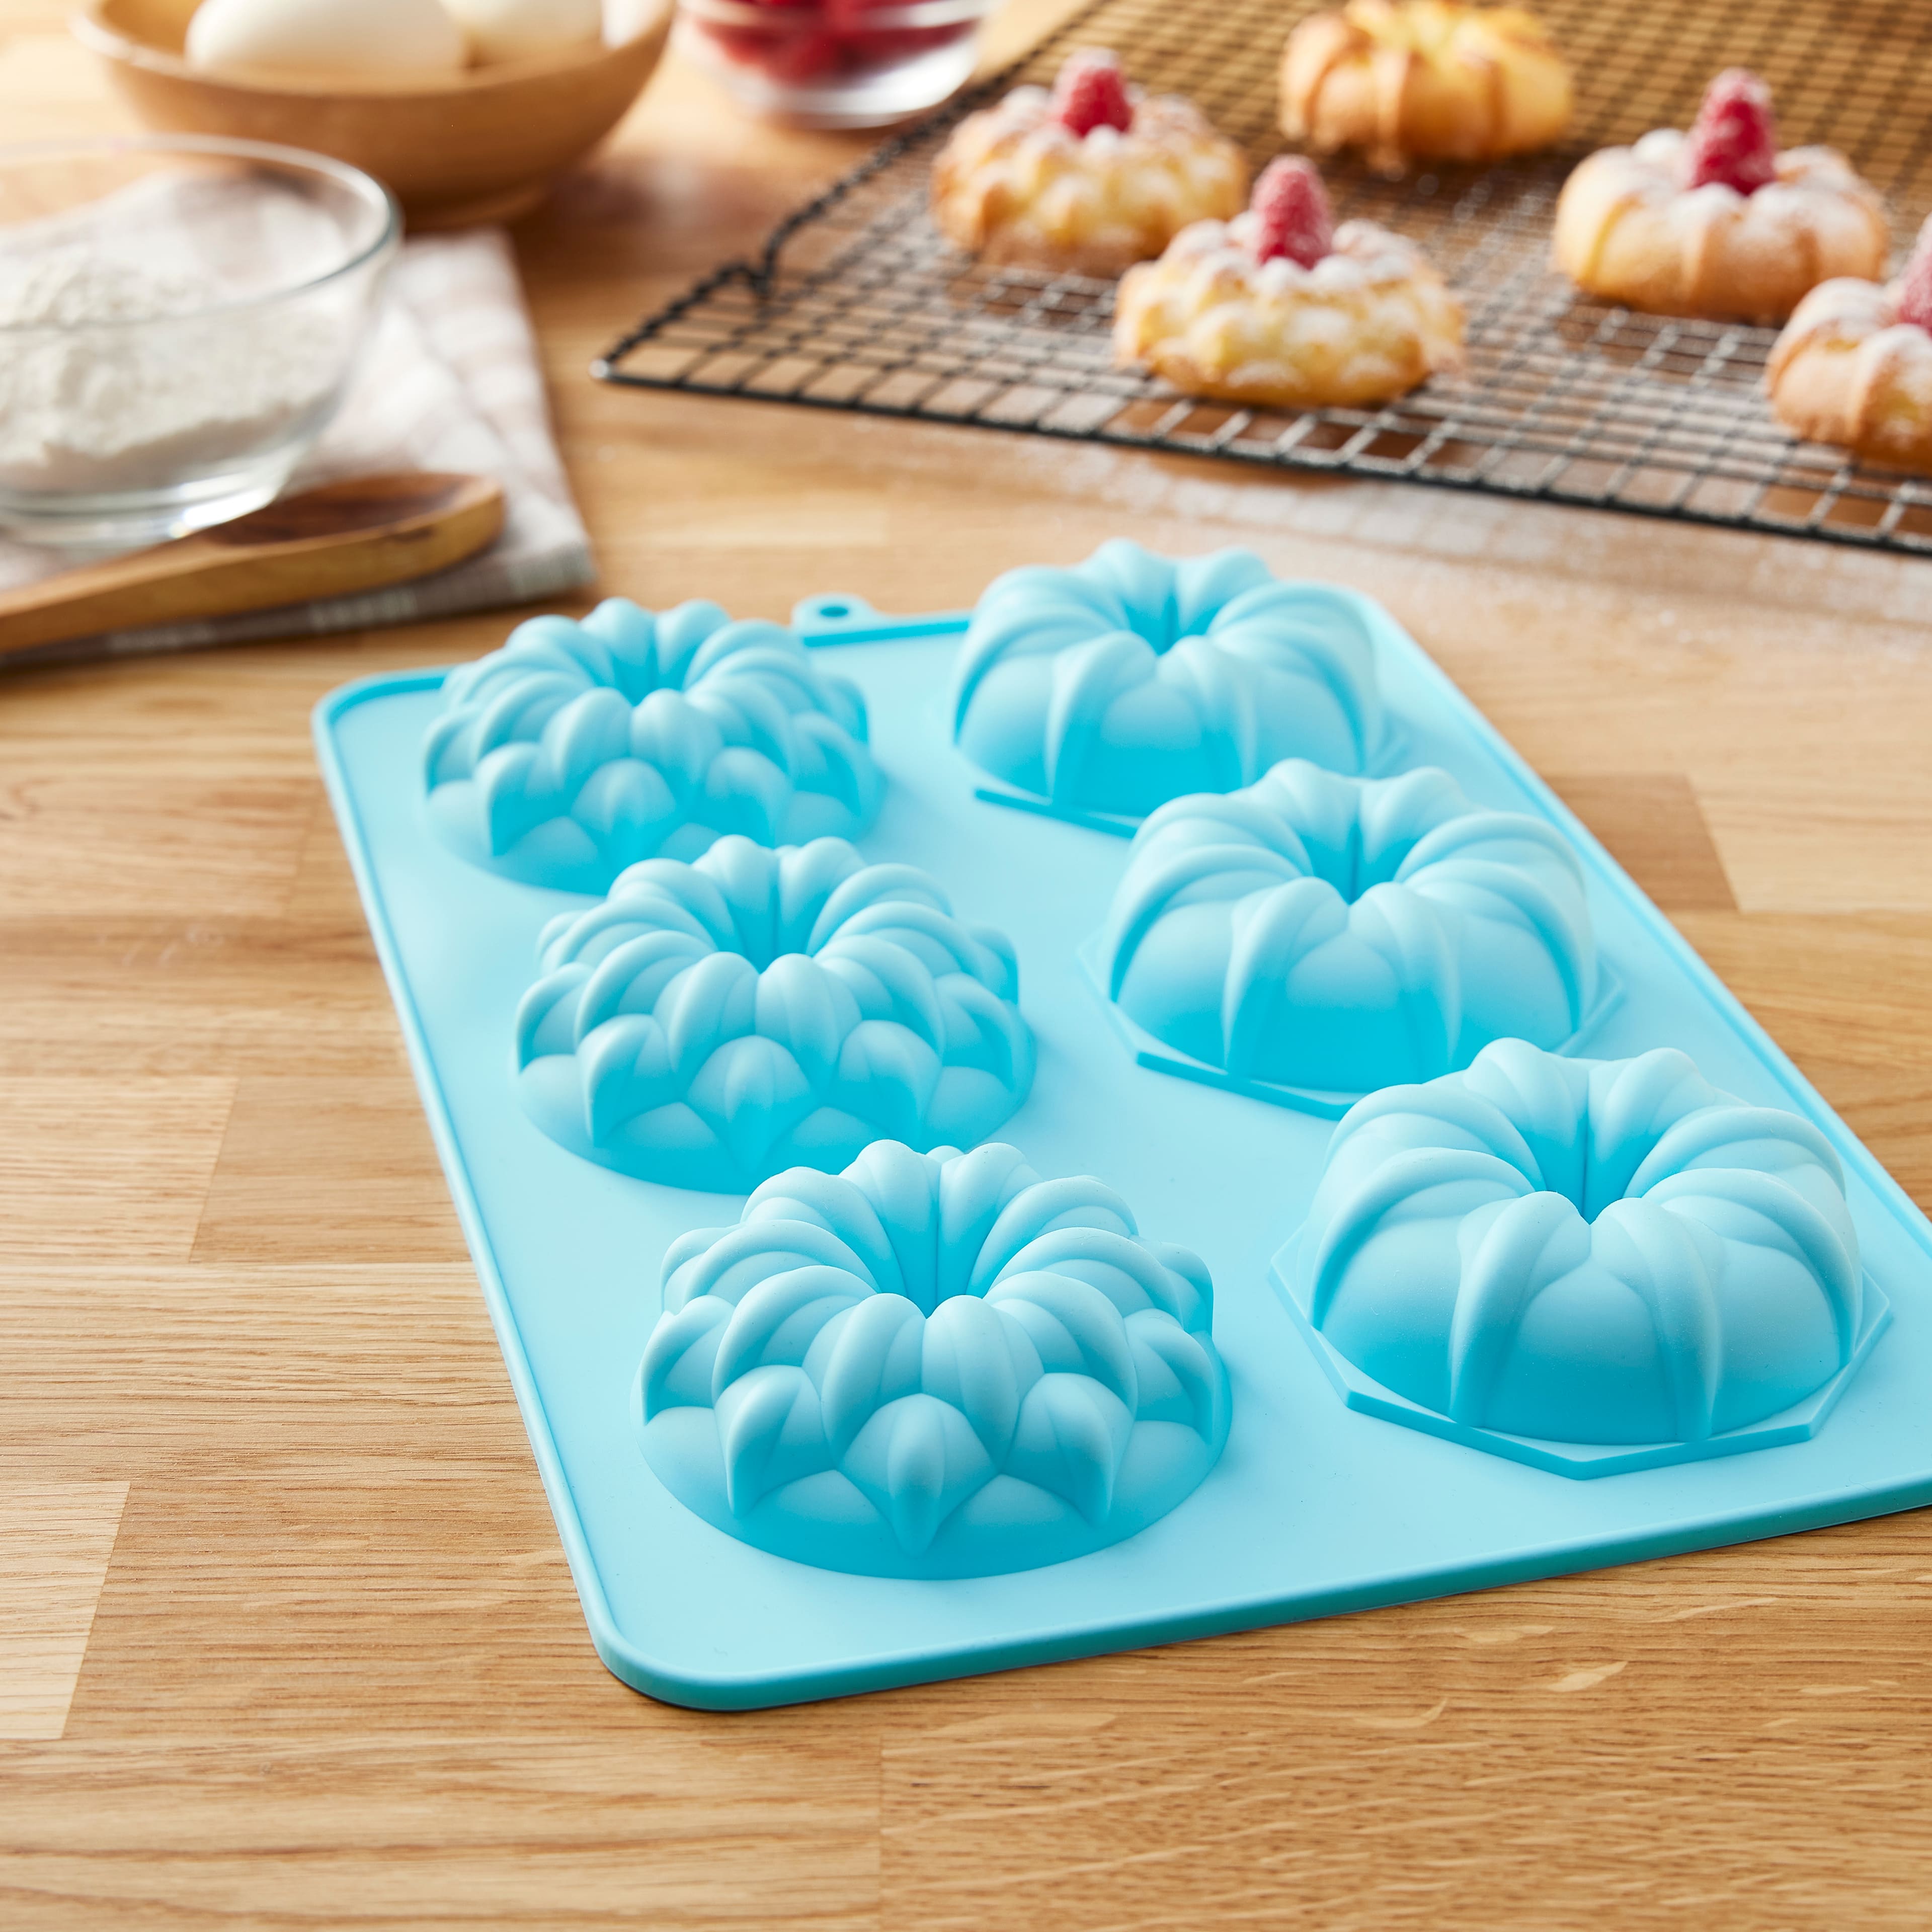 Bite-Size Silicone Treat Mold by Celebrate It®